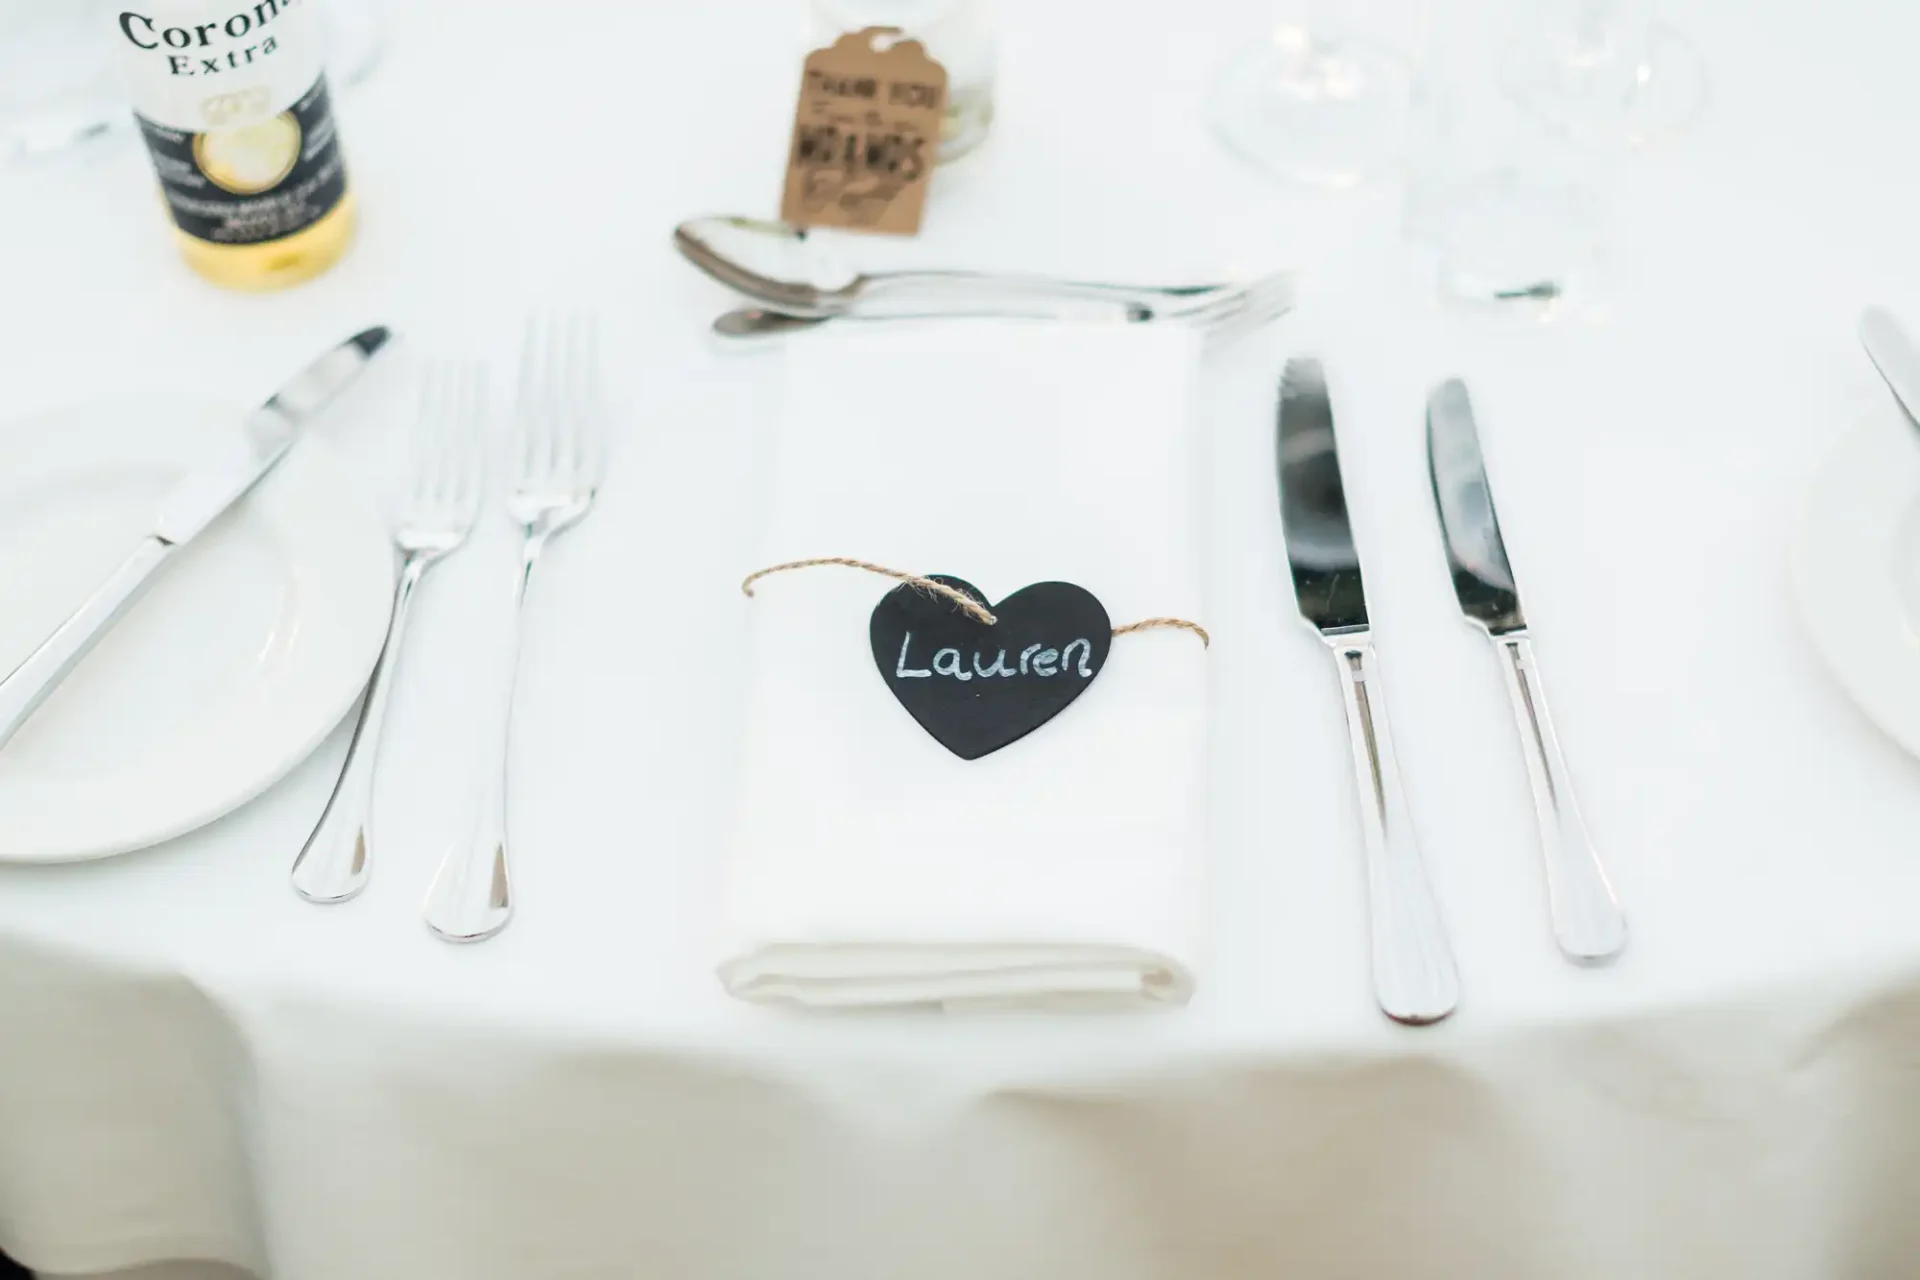 Elegant dining table setting with a white napkin, silver cutlery, and a name tag shaped like a heart reading "lauren" on a white tablecloth.